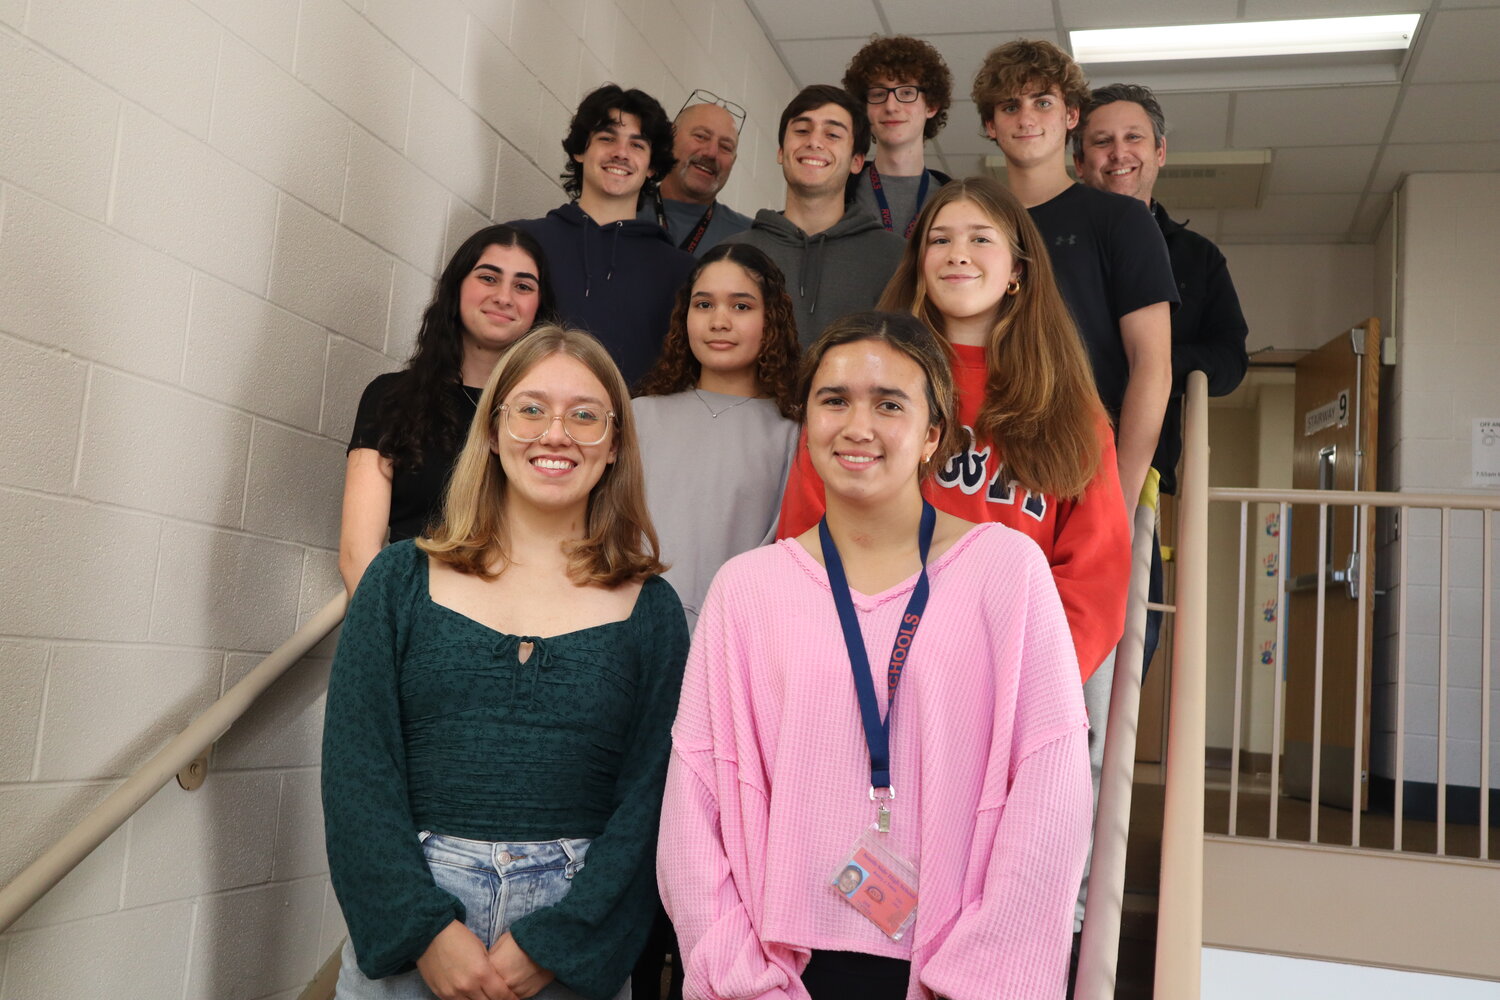 South Side seniors are preparing to compete on a national level. Front row, Natalia Skrodski, left, Avery Testa; second row, Sophia Bracco, left, Allison Paulino and Bianca Oronato; third row, Noah Feigenbaum, left, Sergio Rosa, Dominic Rosiello; and back row: Research coordinator Herb Weiss, left, Francis Hassin, and science teacher Todd Russo.